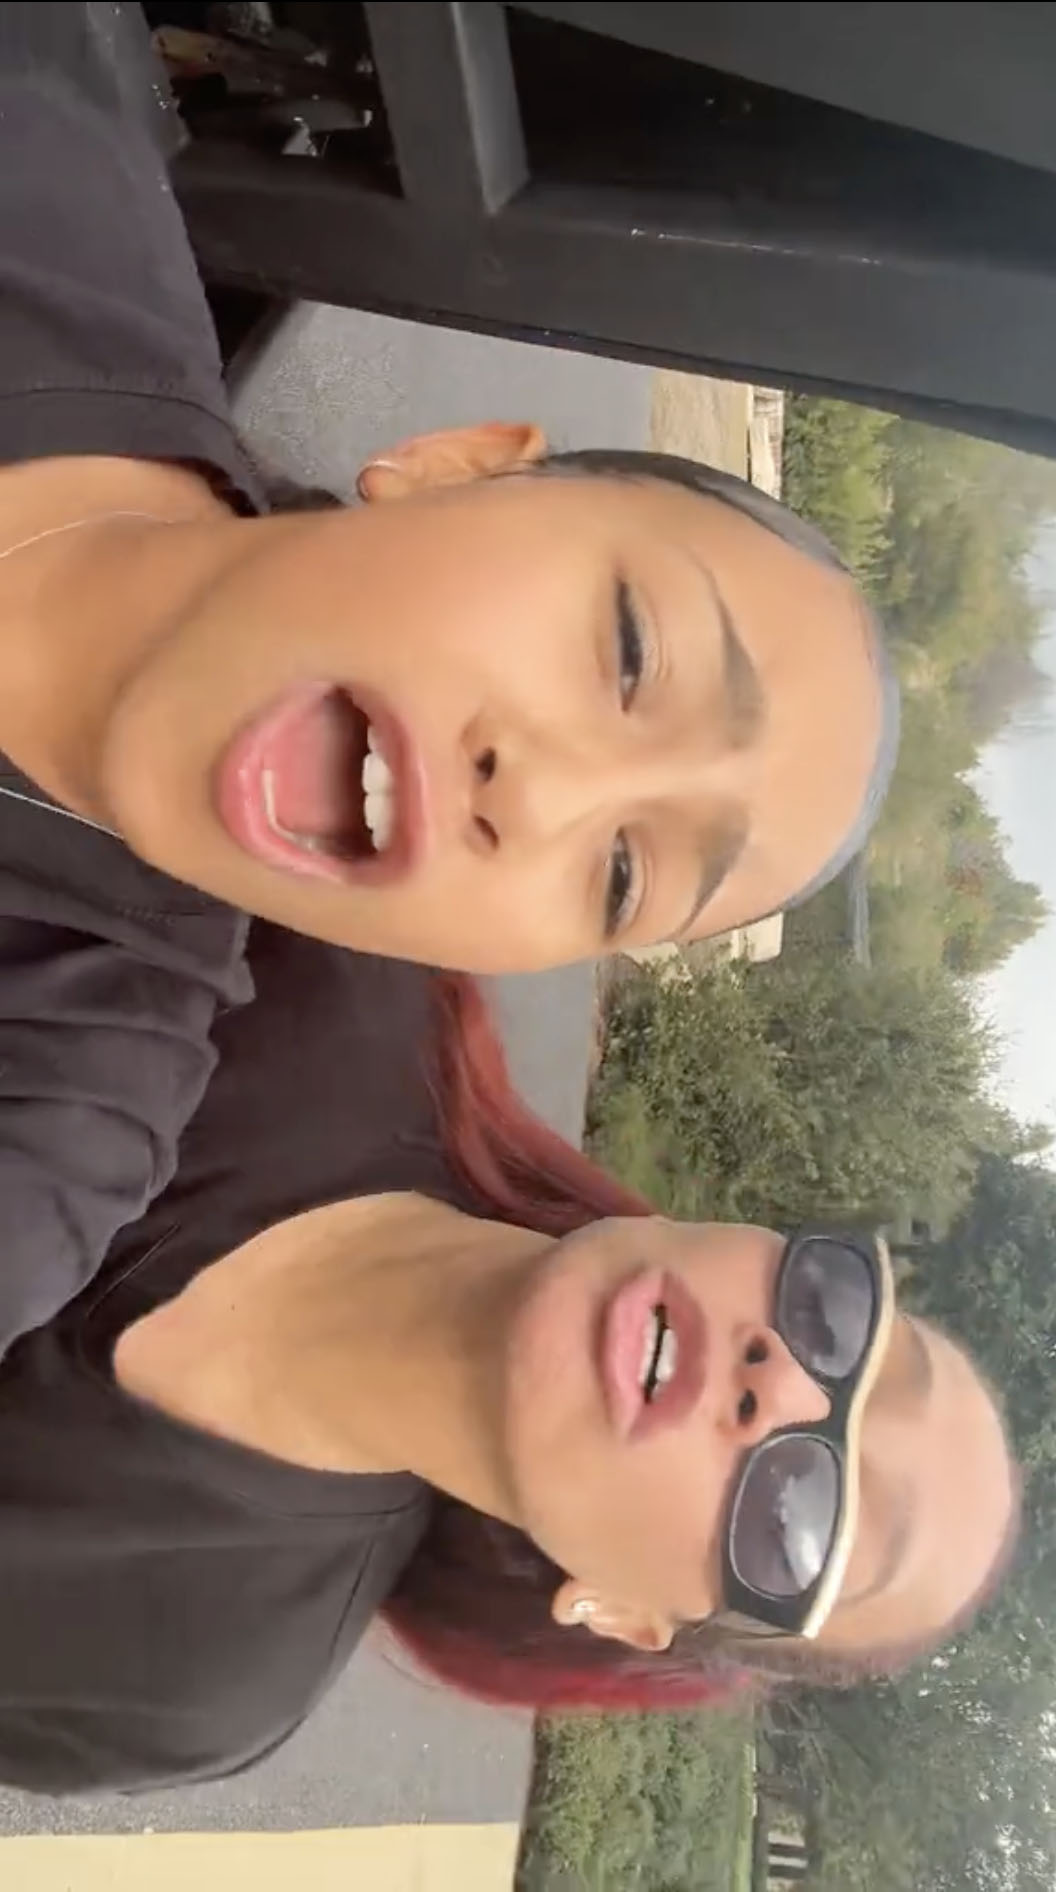 North and La La belted out the lyrics to the 10-year-old's Talking/Once Again verse in unison